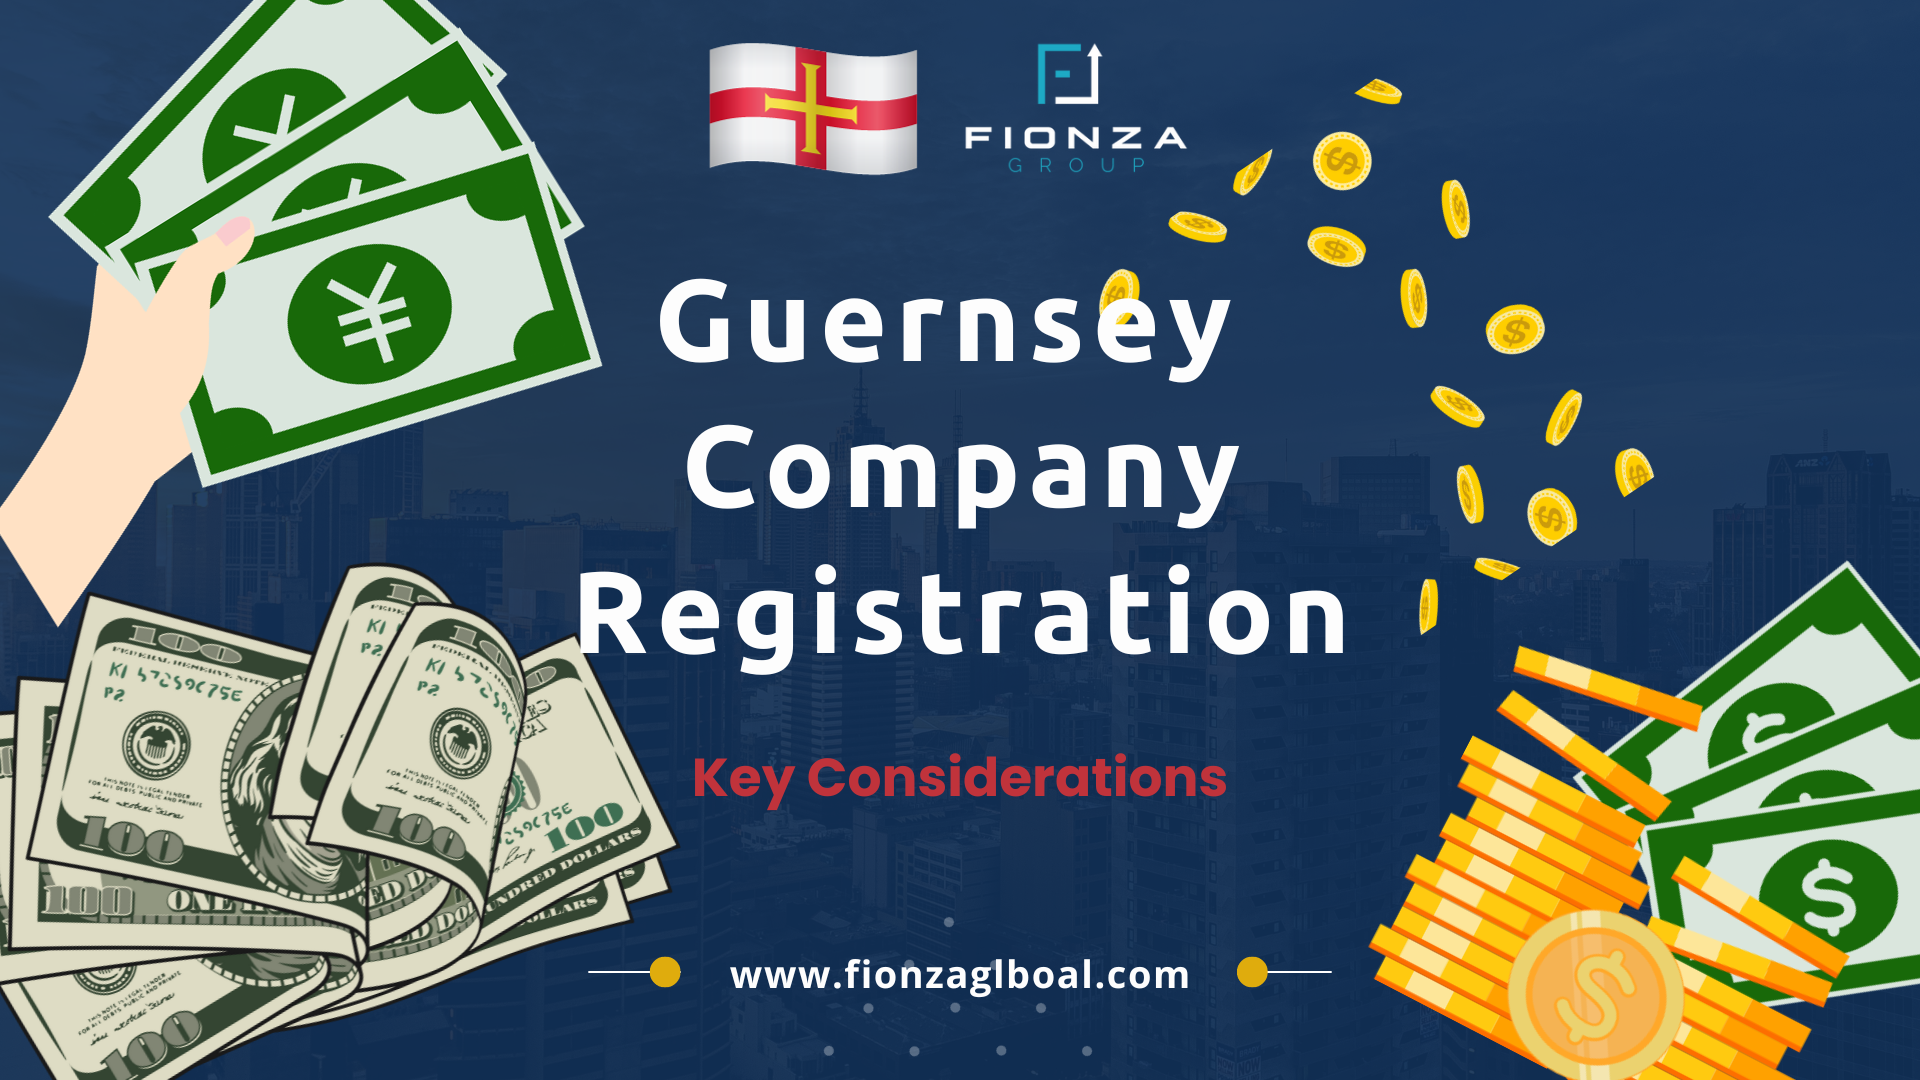 Key Considerations for Guernsey Company Registration